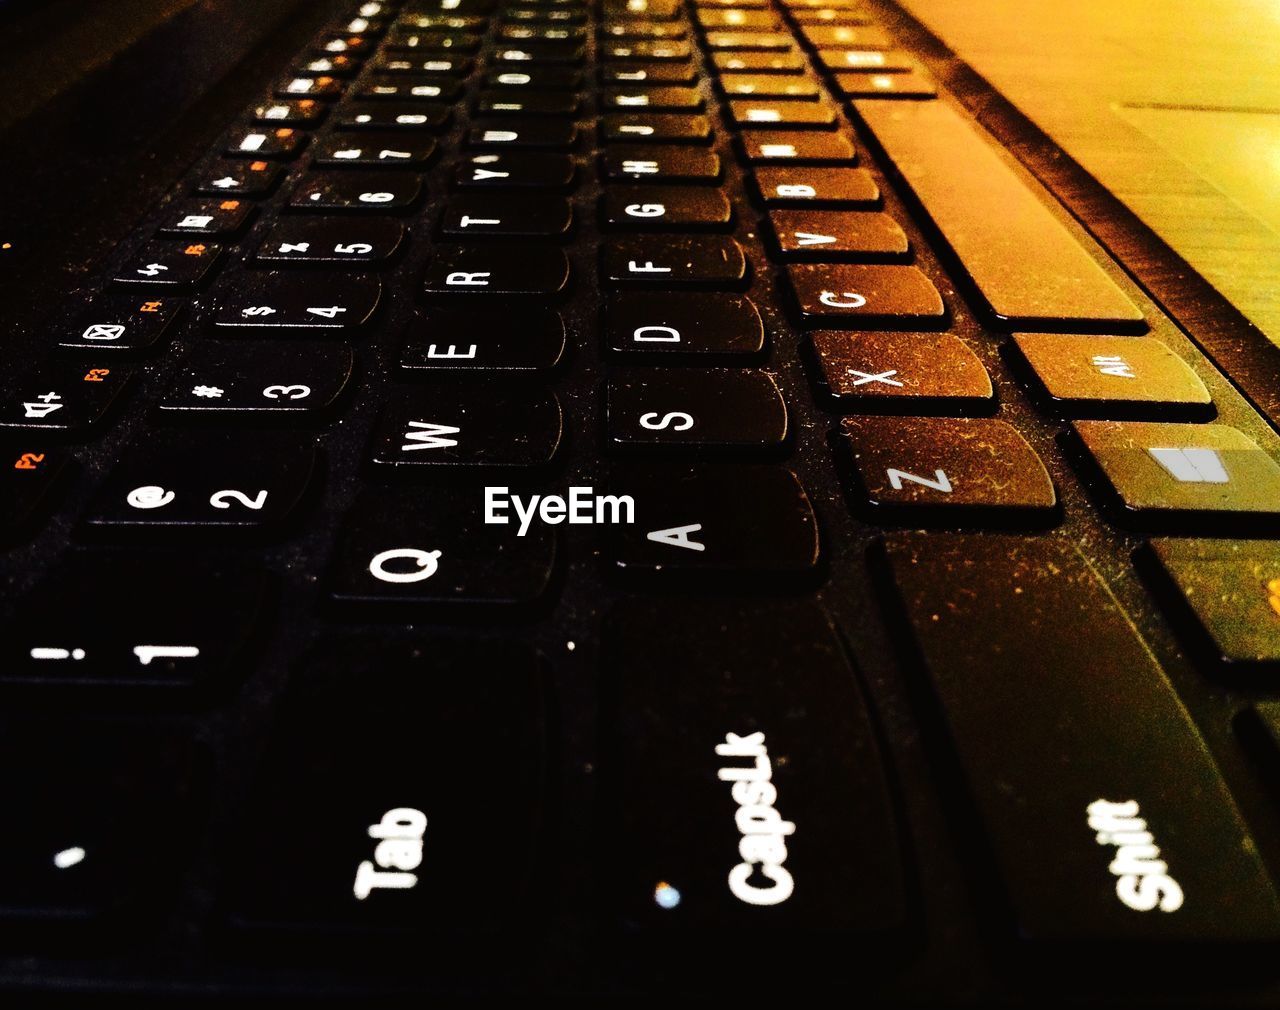 VIEW OF COMPUTER KEYBOARD